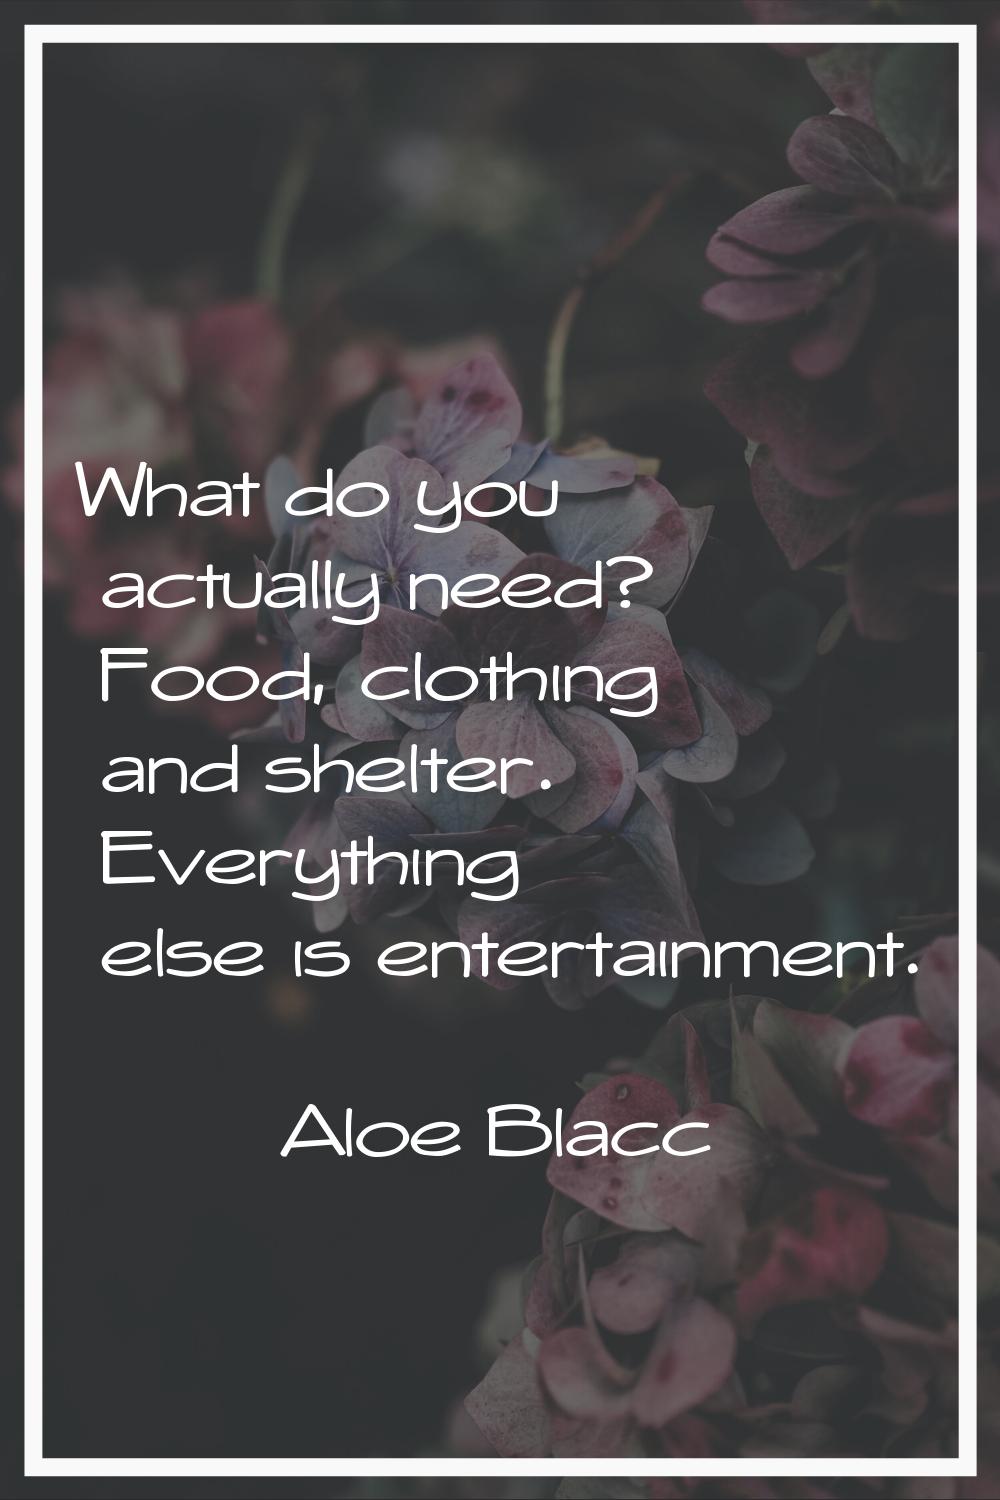 What do you actually need? Food, clothing and shelter. Everything else is entertainment.